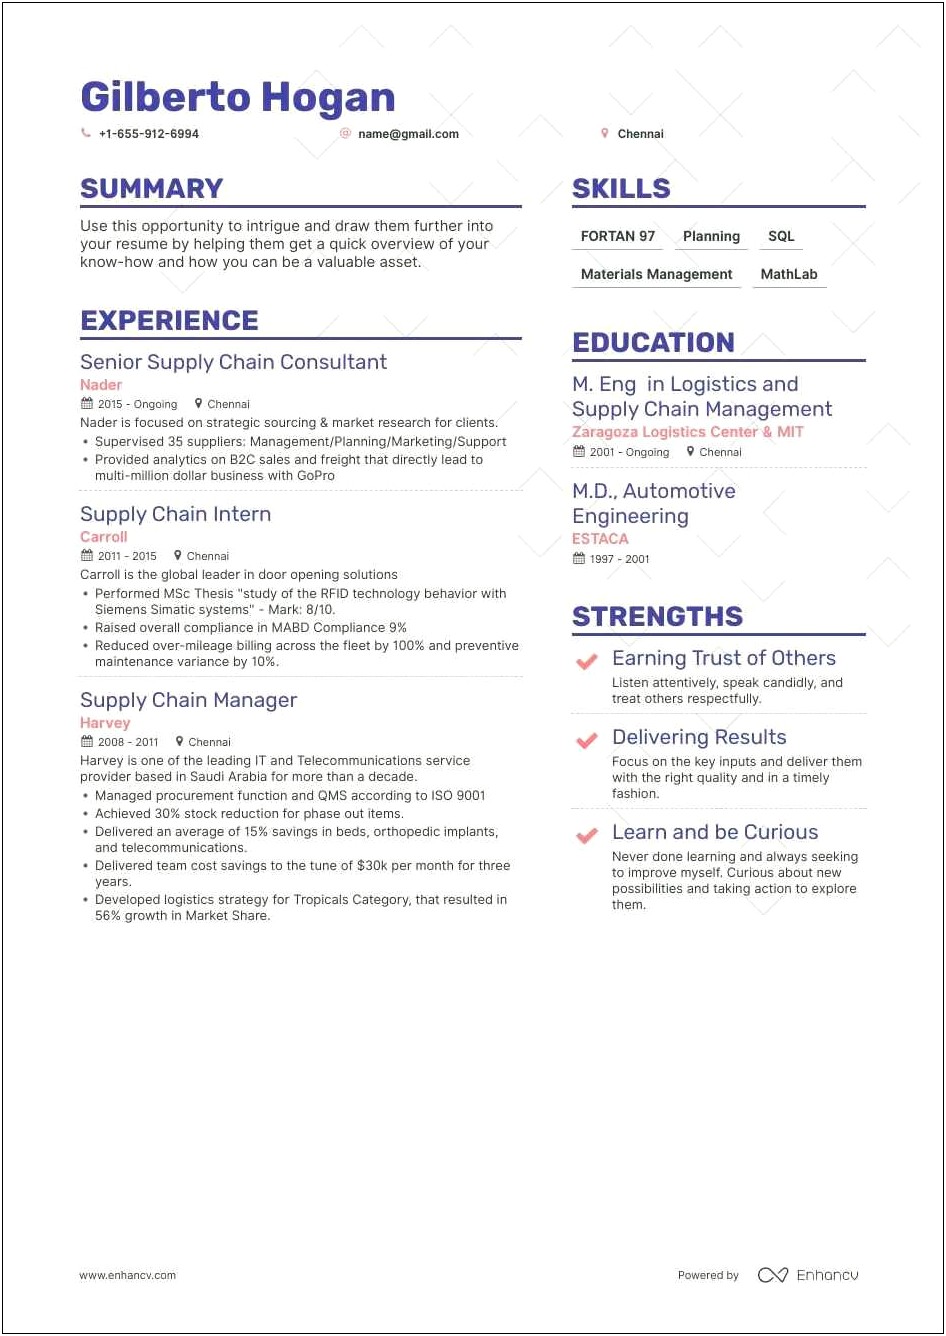 Resume Layout For Supply Chain Job